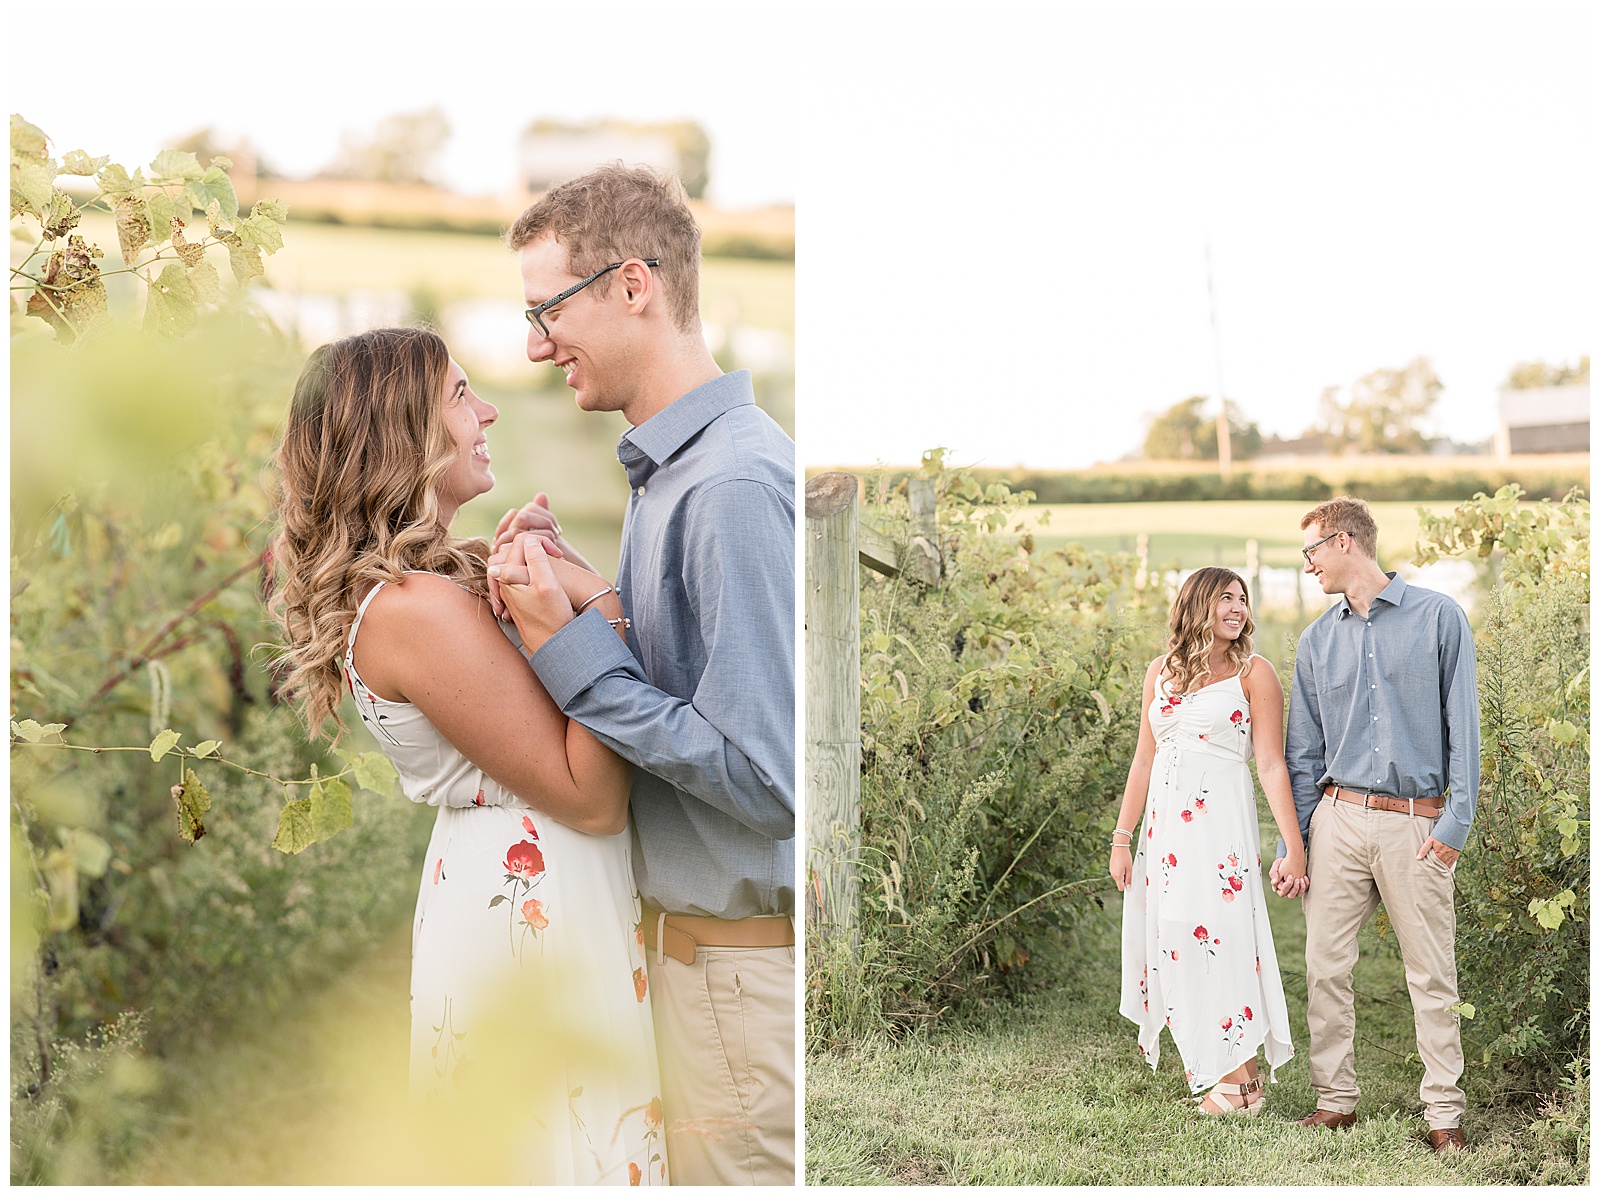 engaged couple standing close holding their hands together in between them as woman leans back slightly among tall wild grasses on sunny evening in pennsylvania